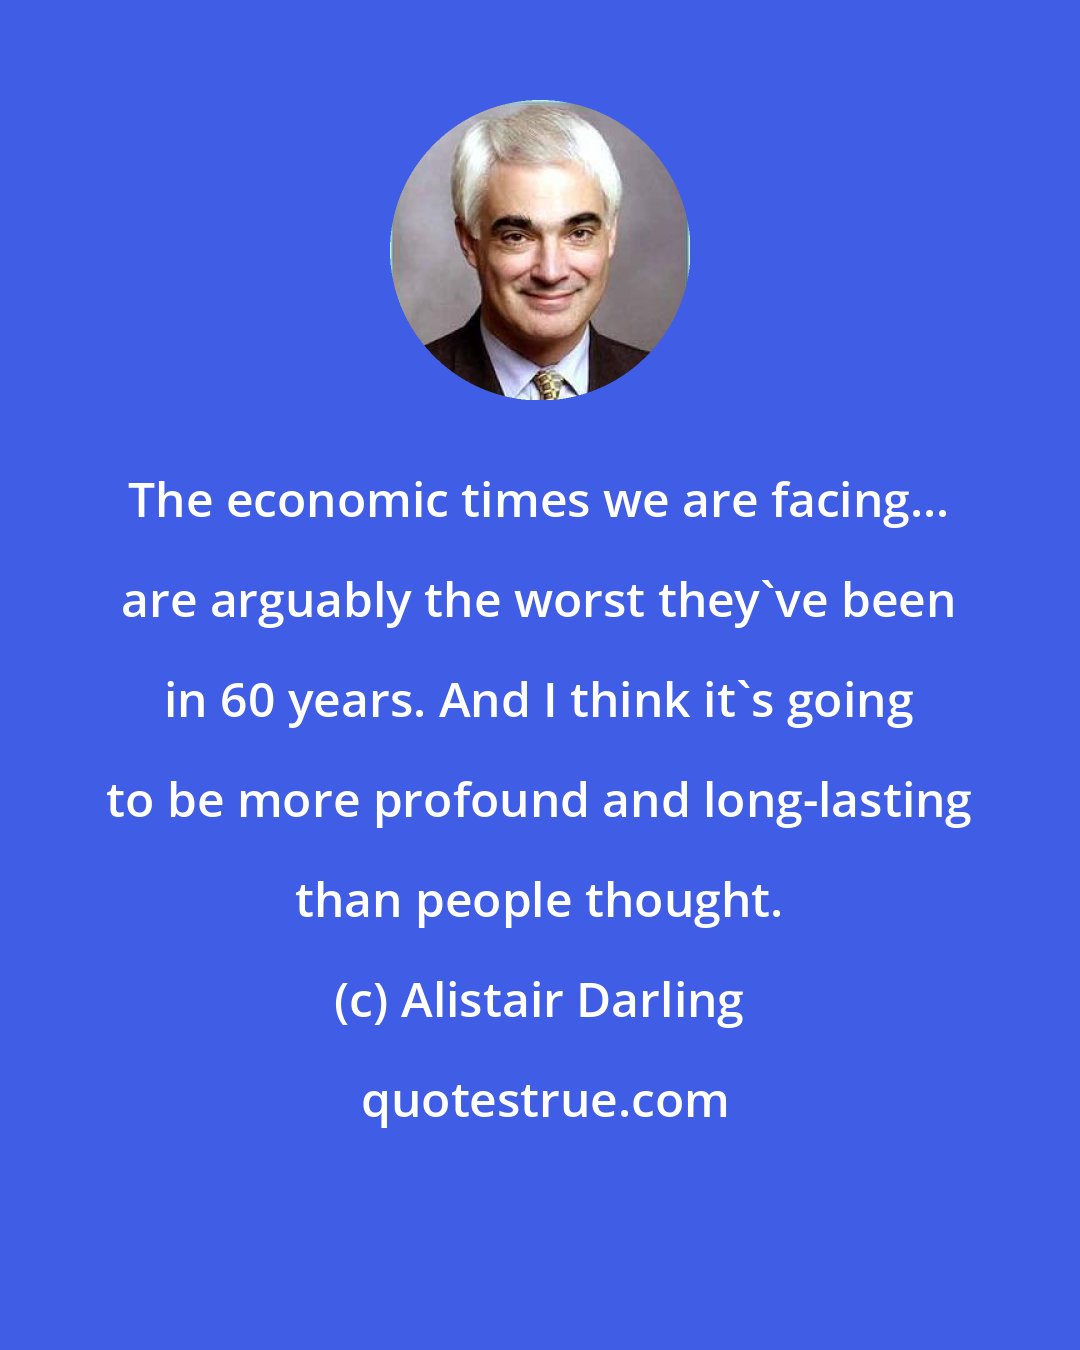 Alistair Darling: The economic times we are facing... are arguably the worst they've been in 60 years. And I think it's going to be more profound and long-lasting than people thought.